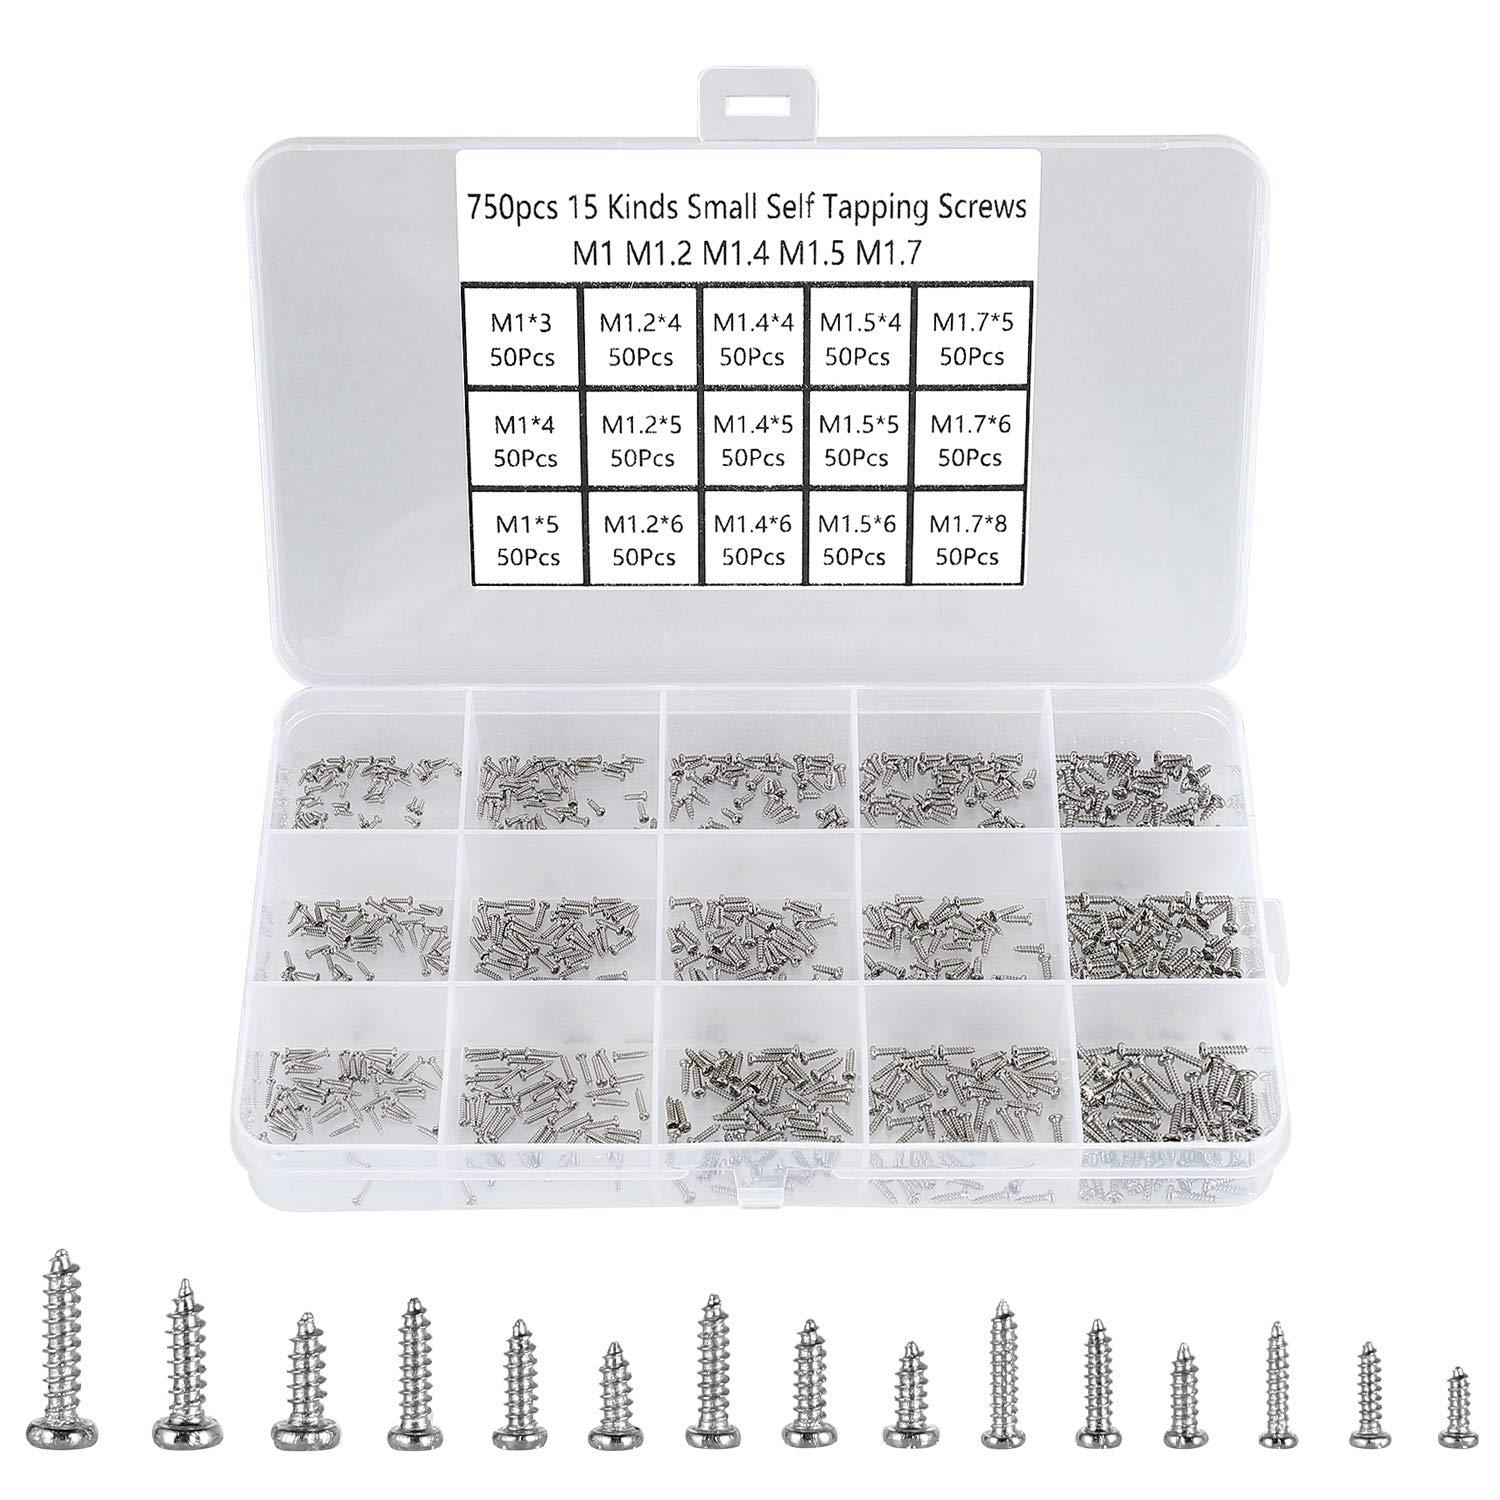 HanTof 750pcs Silver Tiny Screws for Electronics, M1, M1.2, M1.4, M1.5, M1.7 Very Small Phillips Pan Head Self Tapping Screws